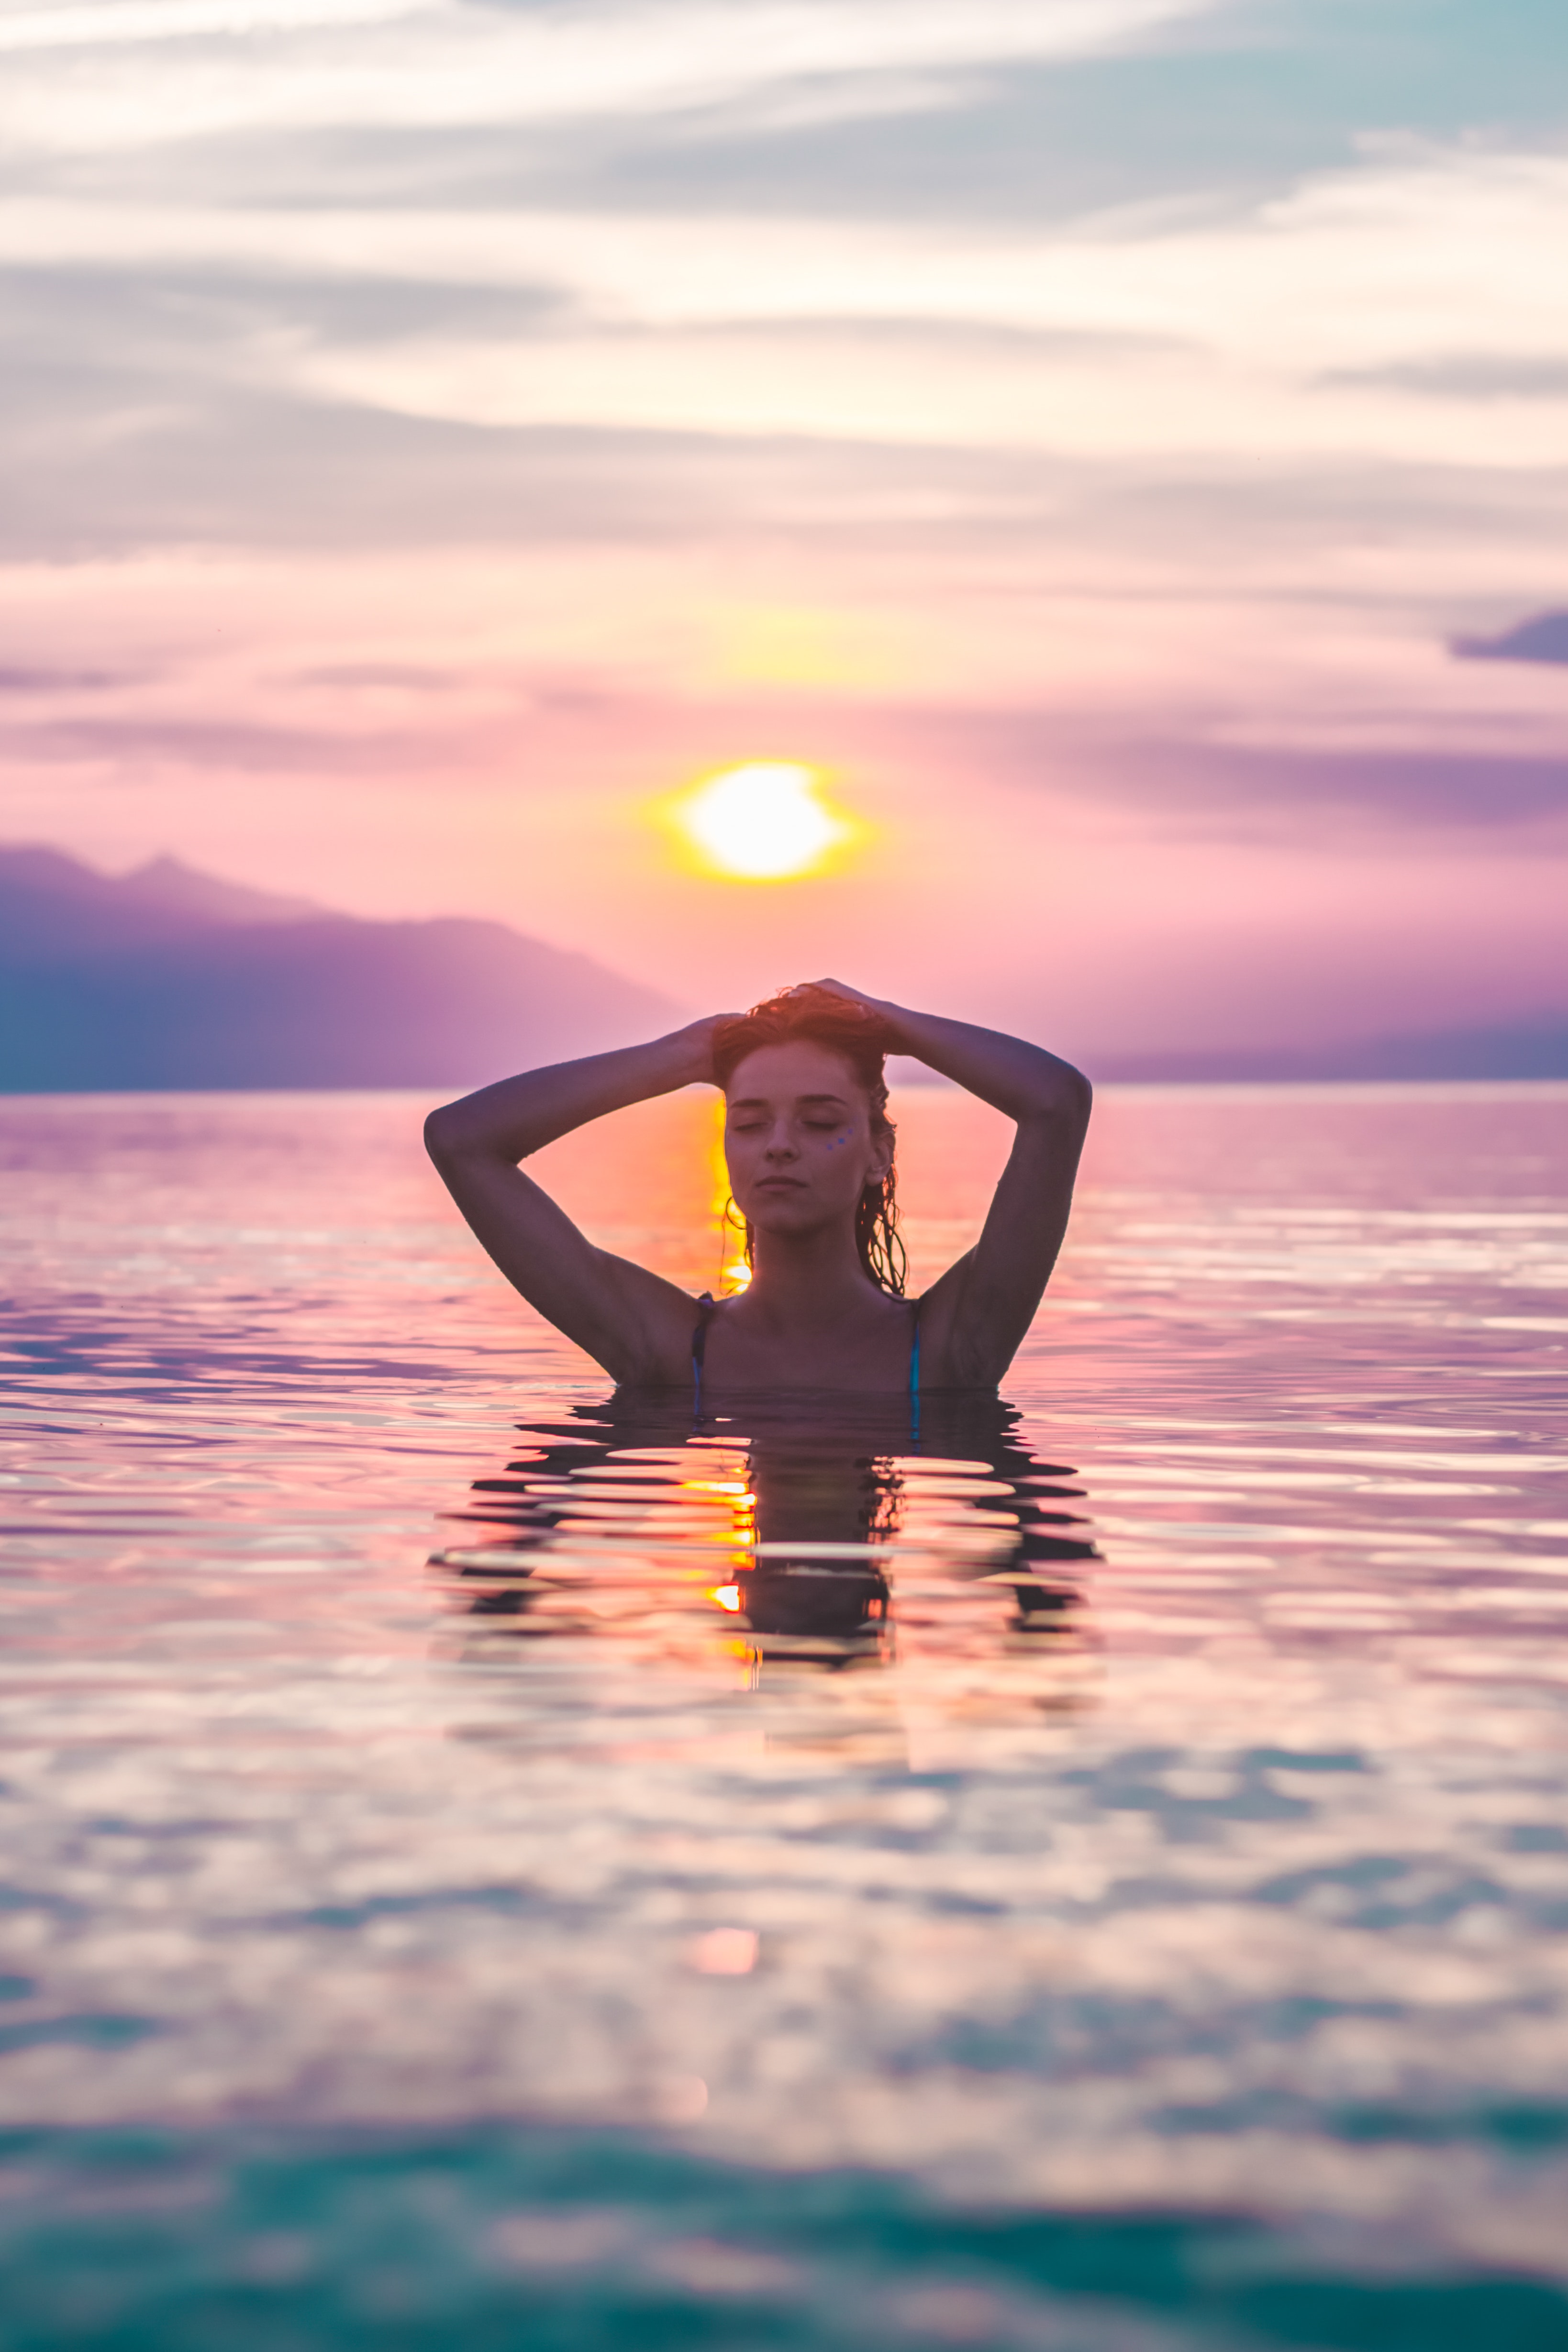 Selective focus photo of a woman bathing in body of water during golden hour